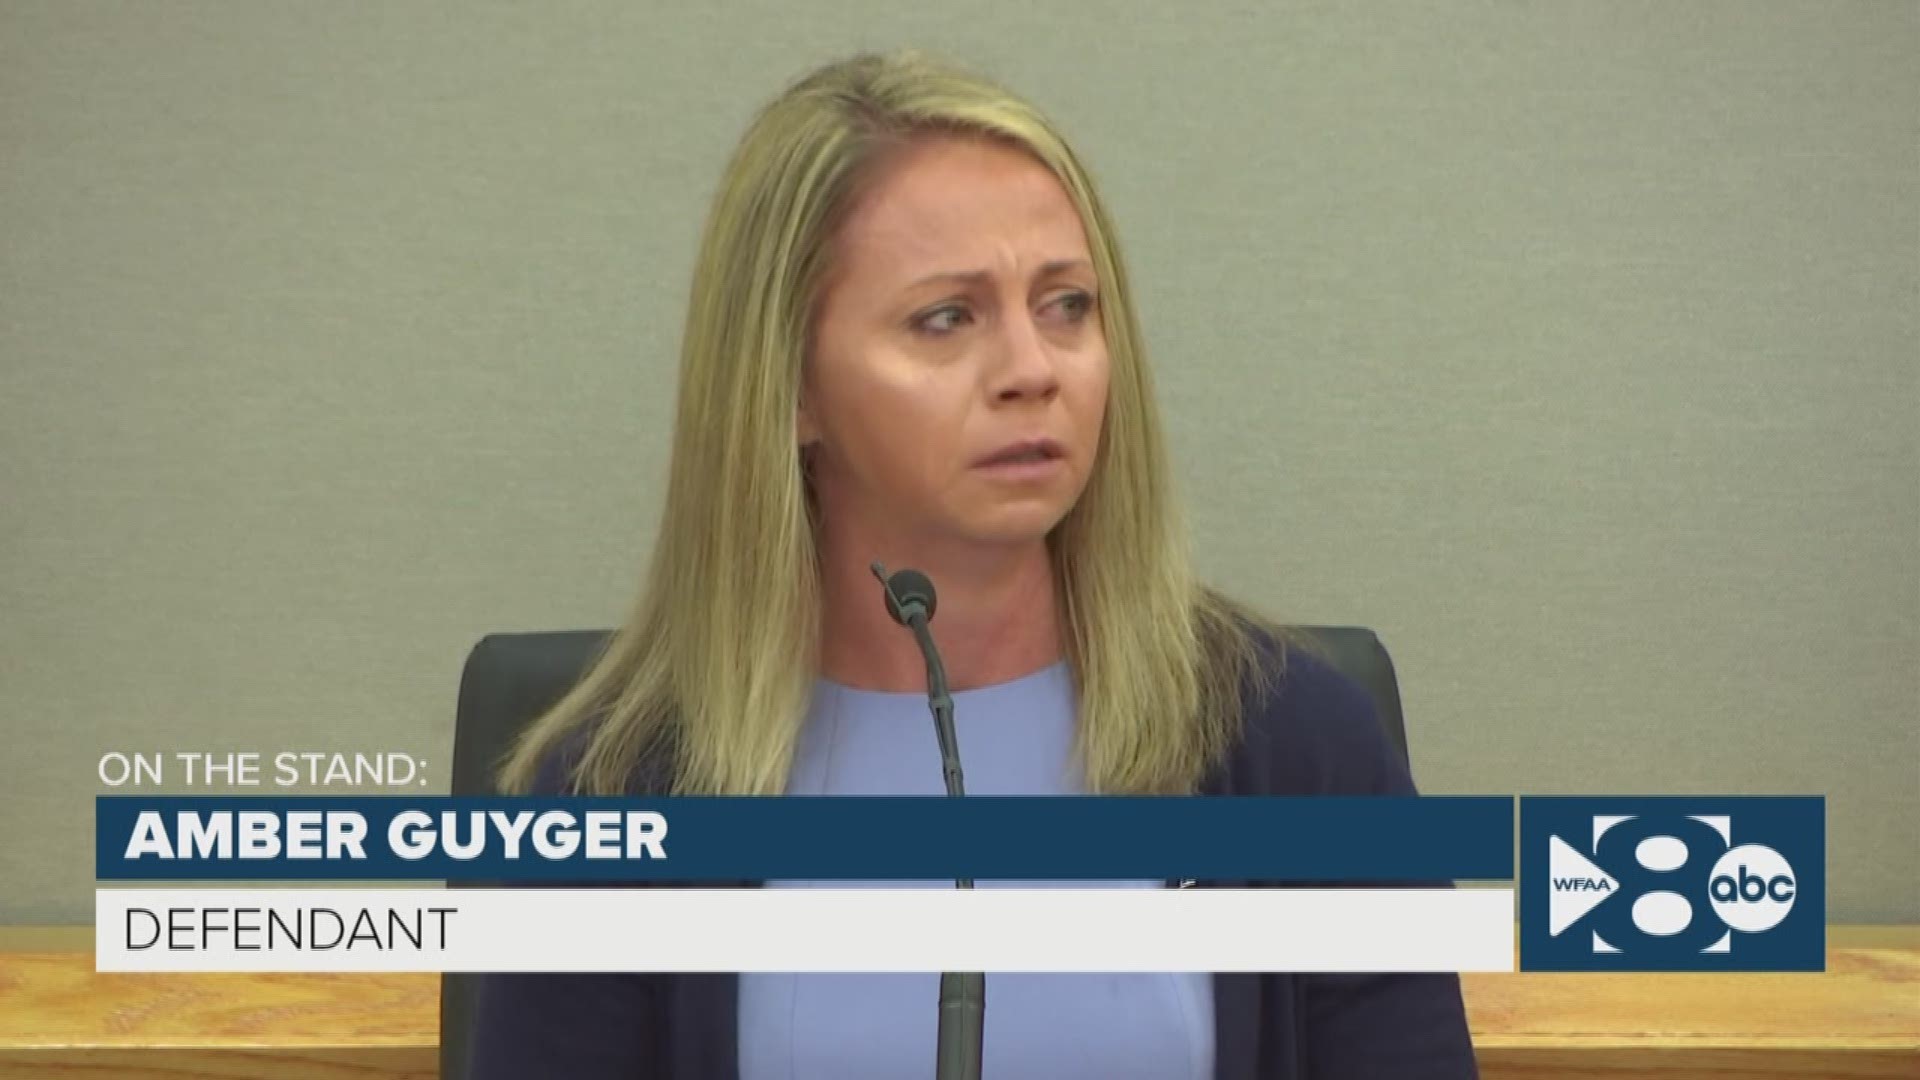 Judge Tammy Kemp called for a 10 minute break after Amber Guyger became visibly emotional on the stand.